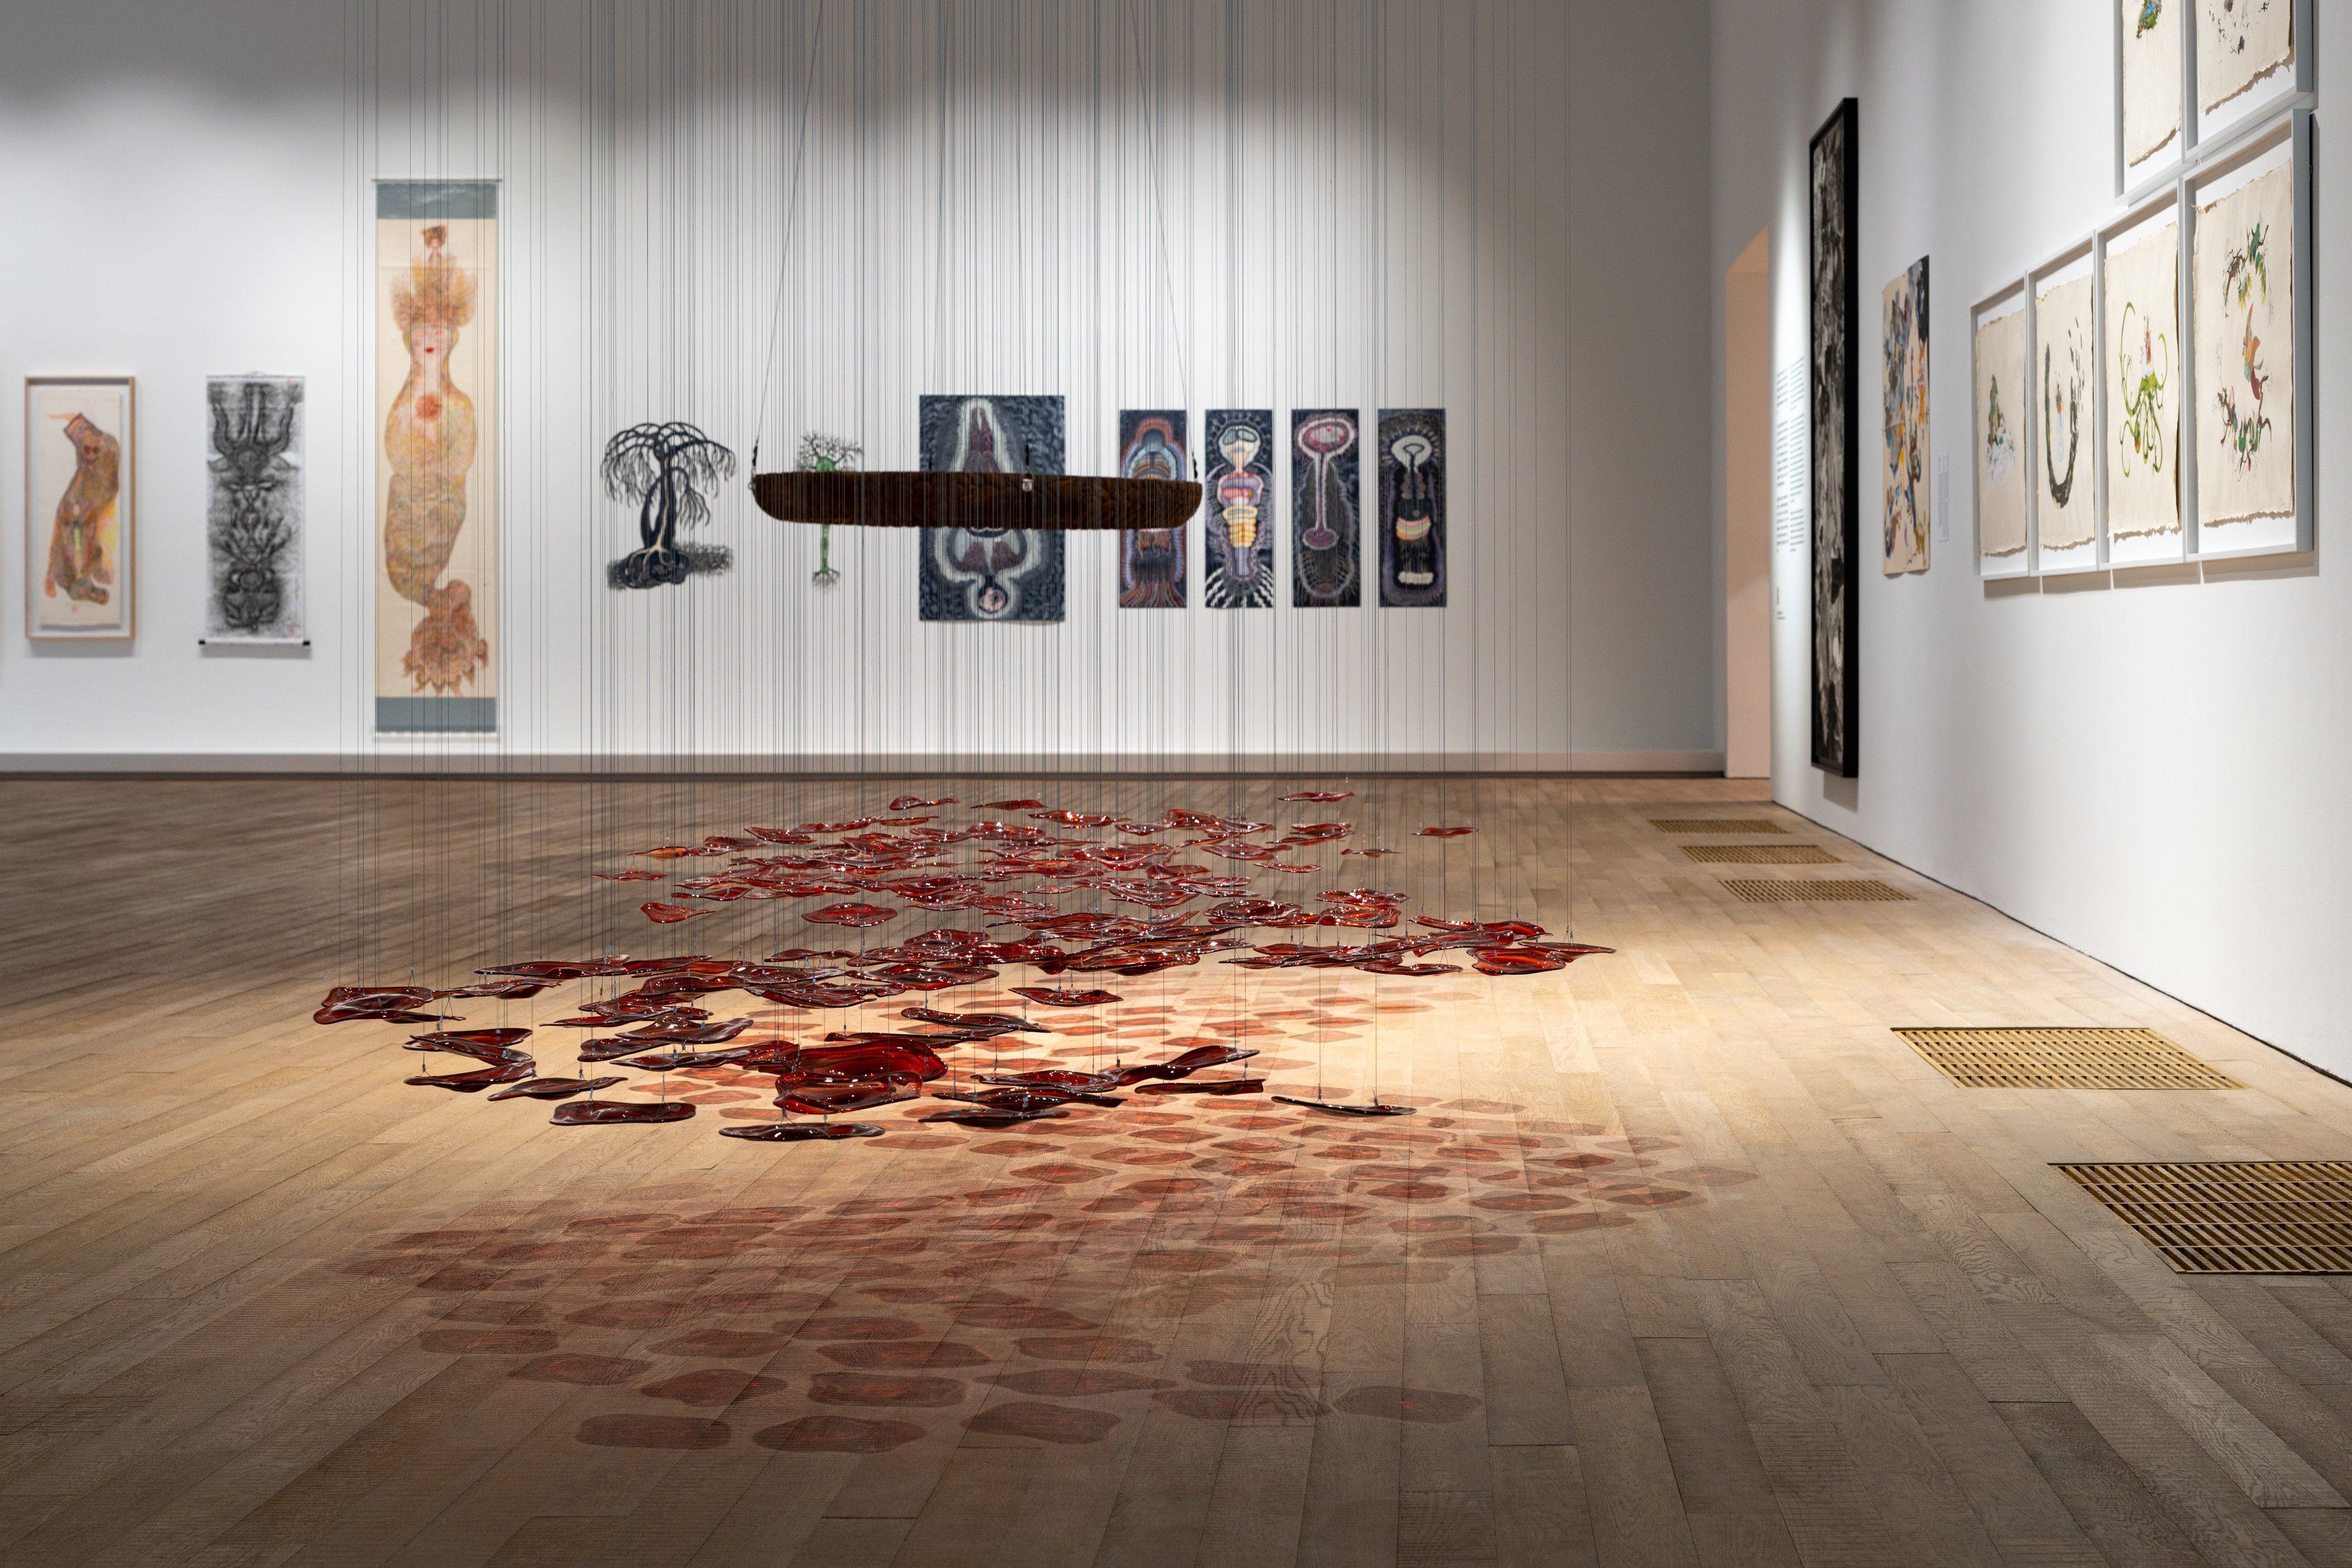 “The Red River”, a 2023 work by Palestinian artist Dima Srouji, is seen with other pieces at “Green Snake: Women-centred Ecologies”, a new eco-feminist exhibition at Tai Kwun Contemporary in Hong Kong. Photo: Courtesy of Tai Kwun Contemporary